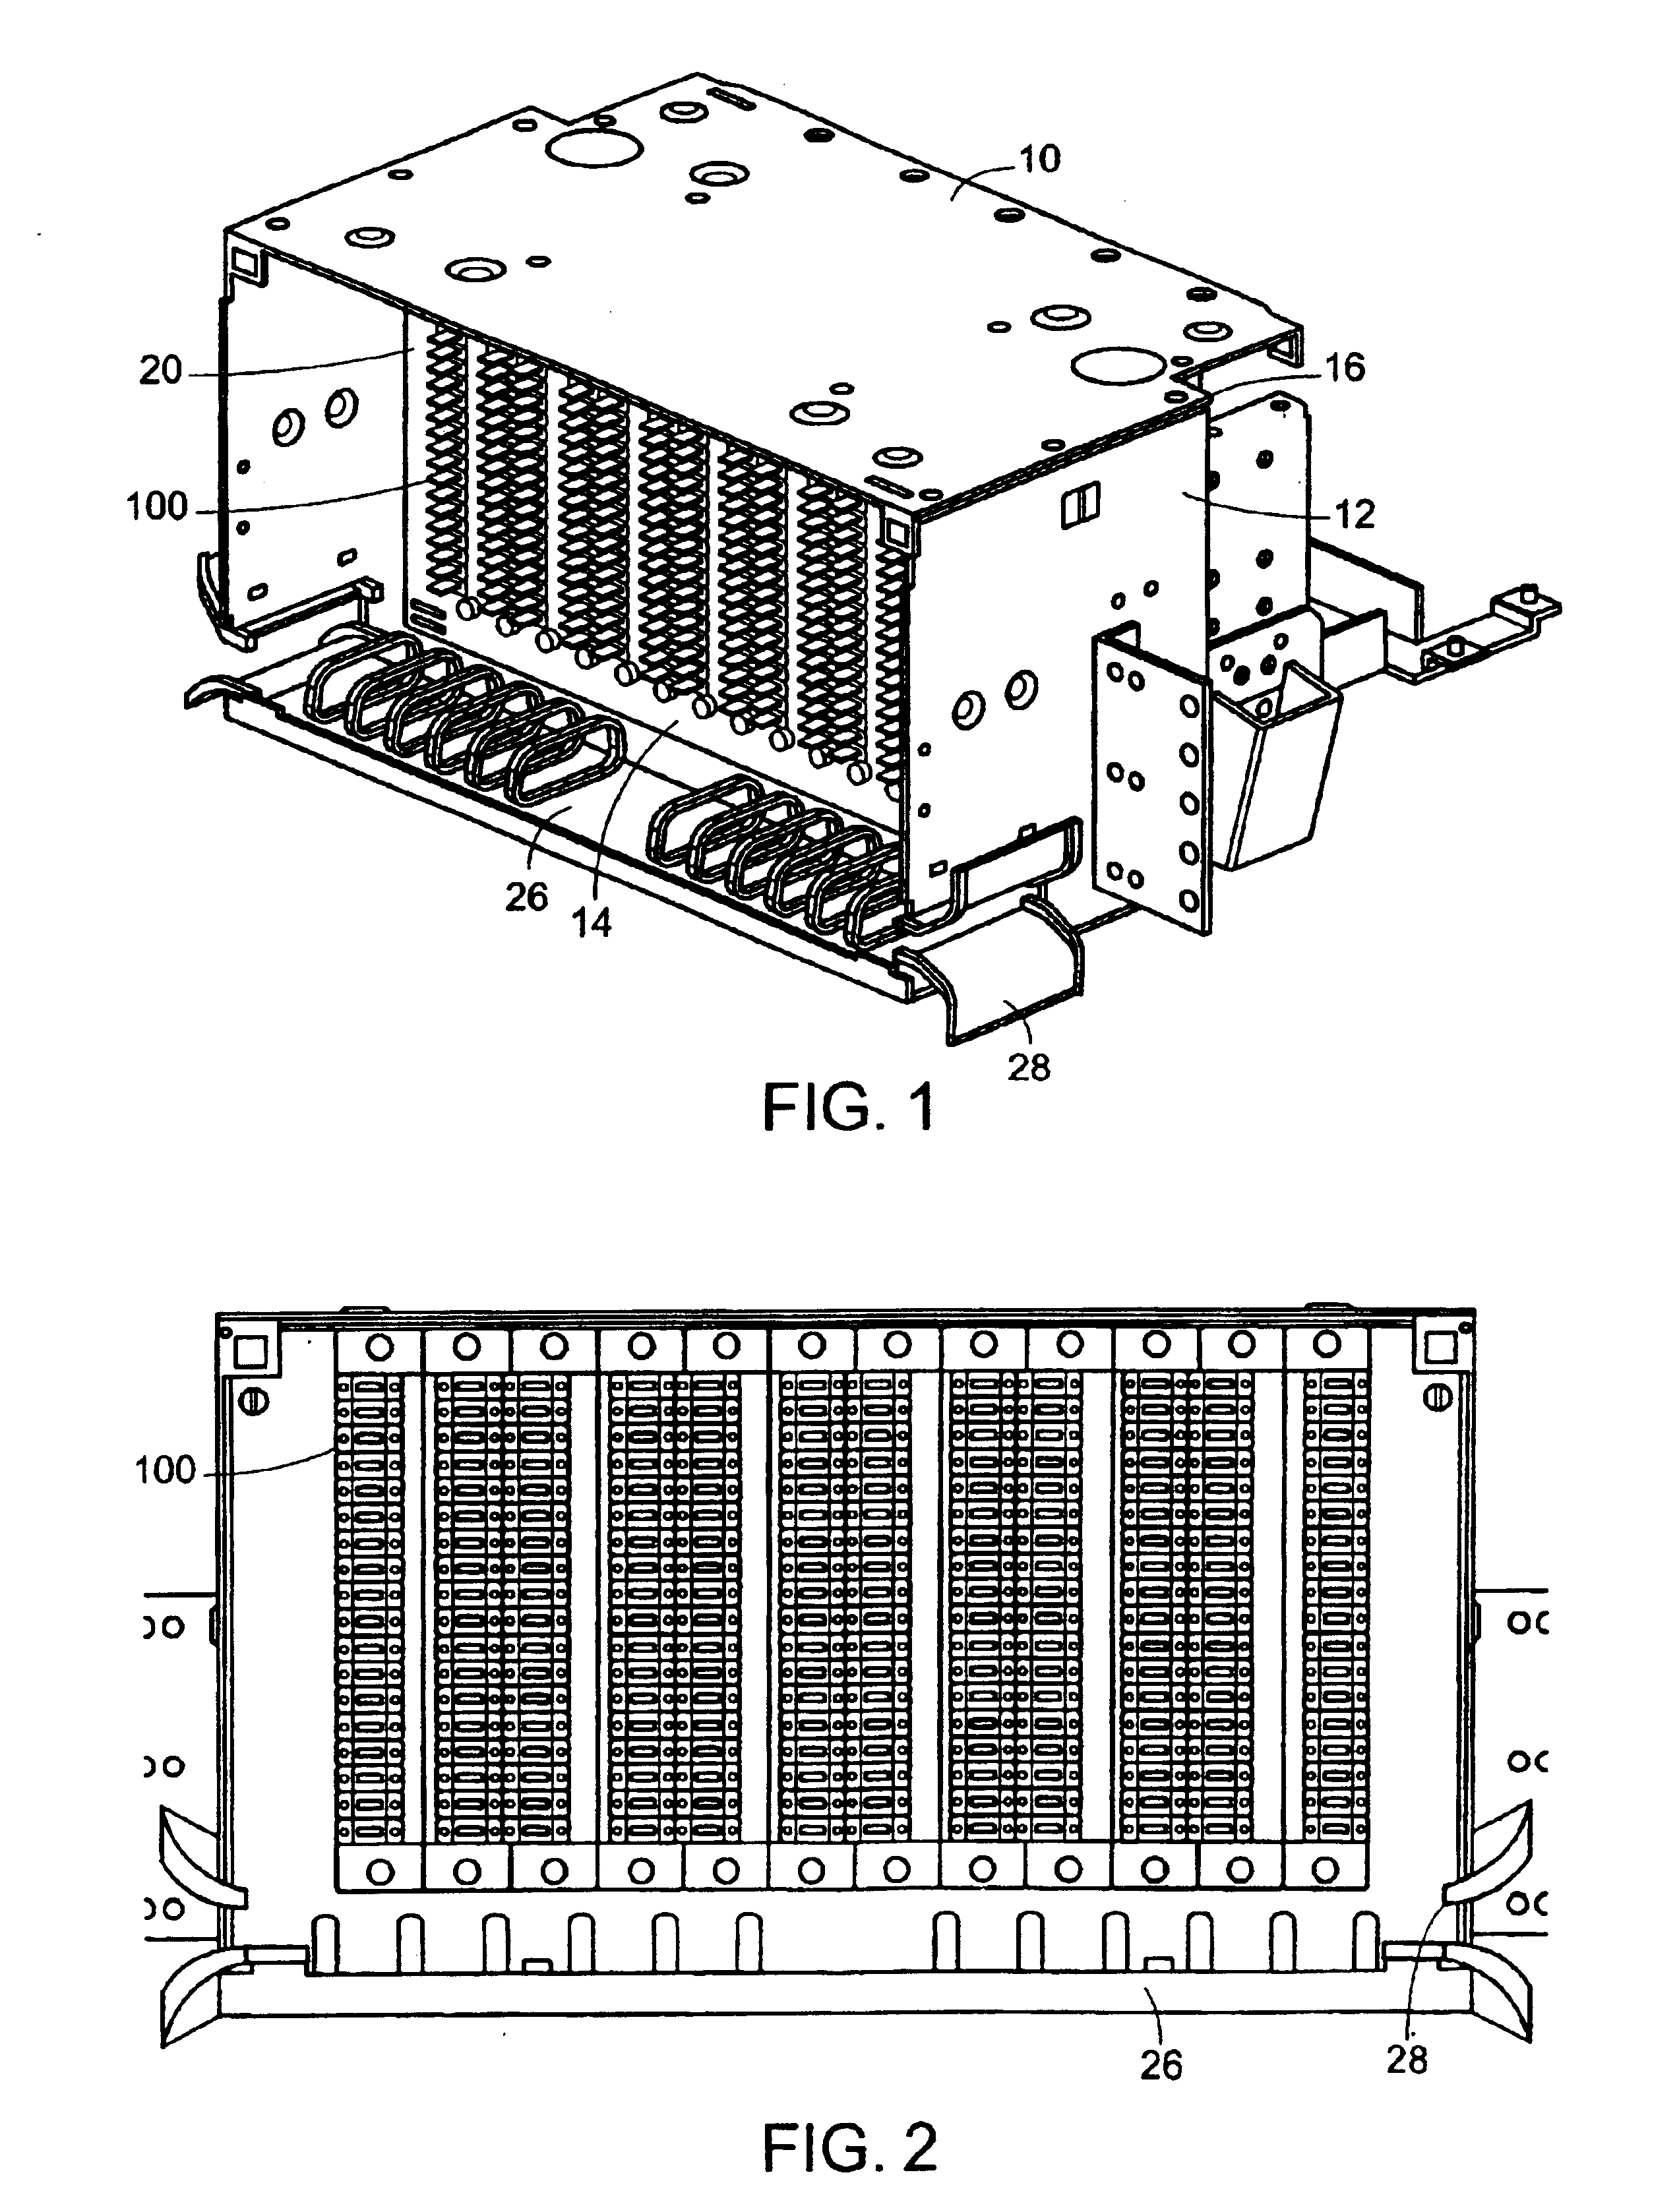 Optical fiber enclosure system using integrated optical connector and coupler assembly